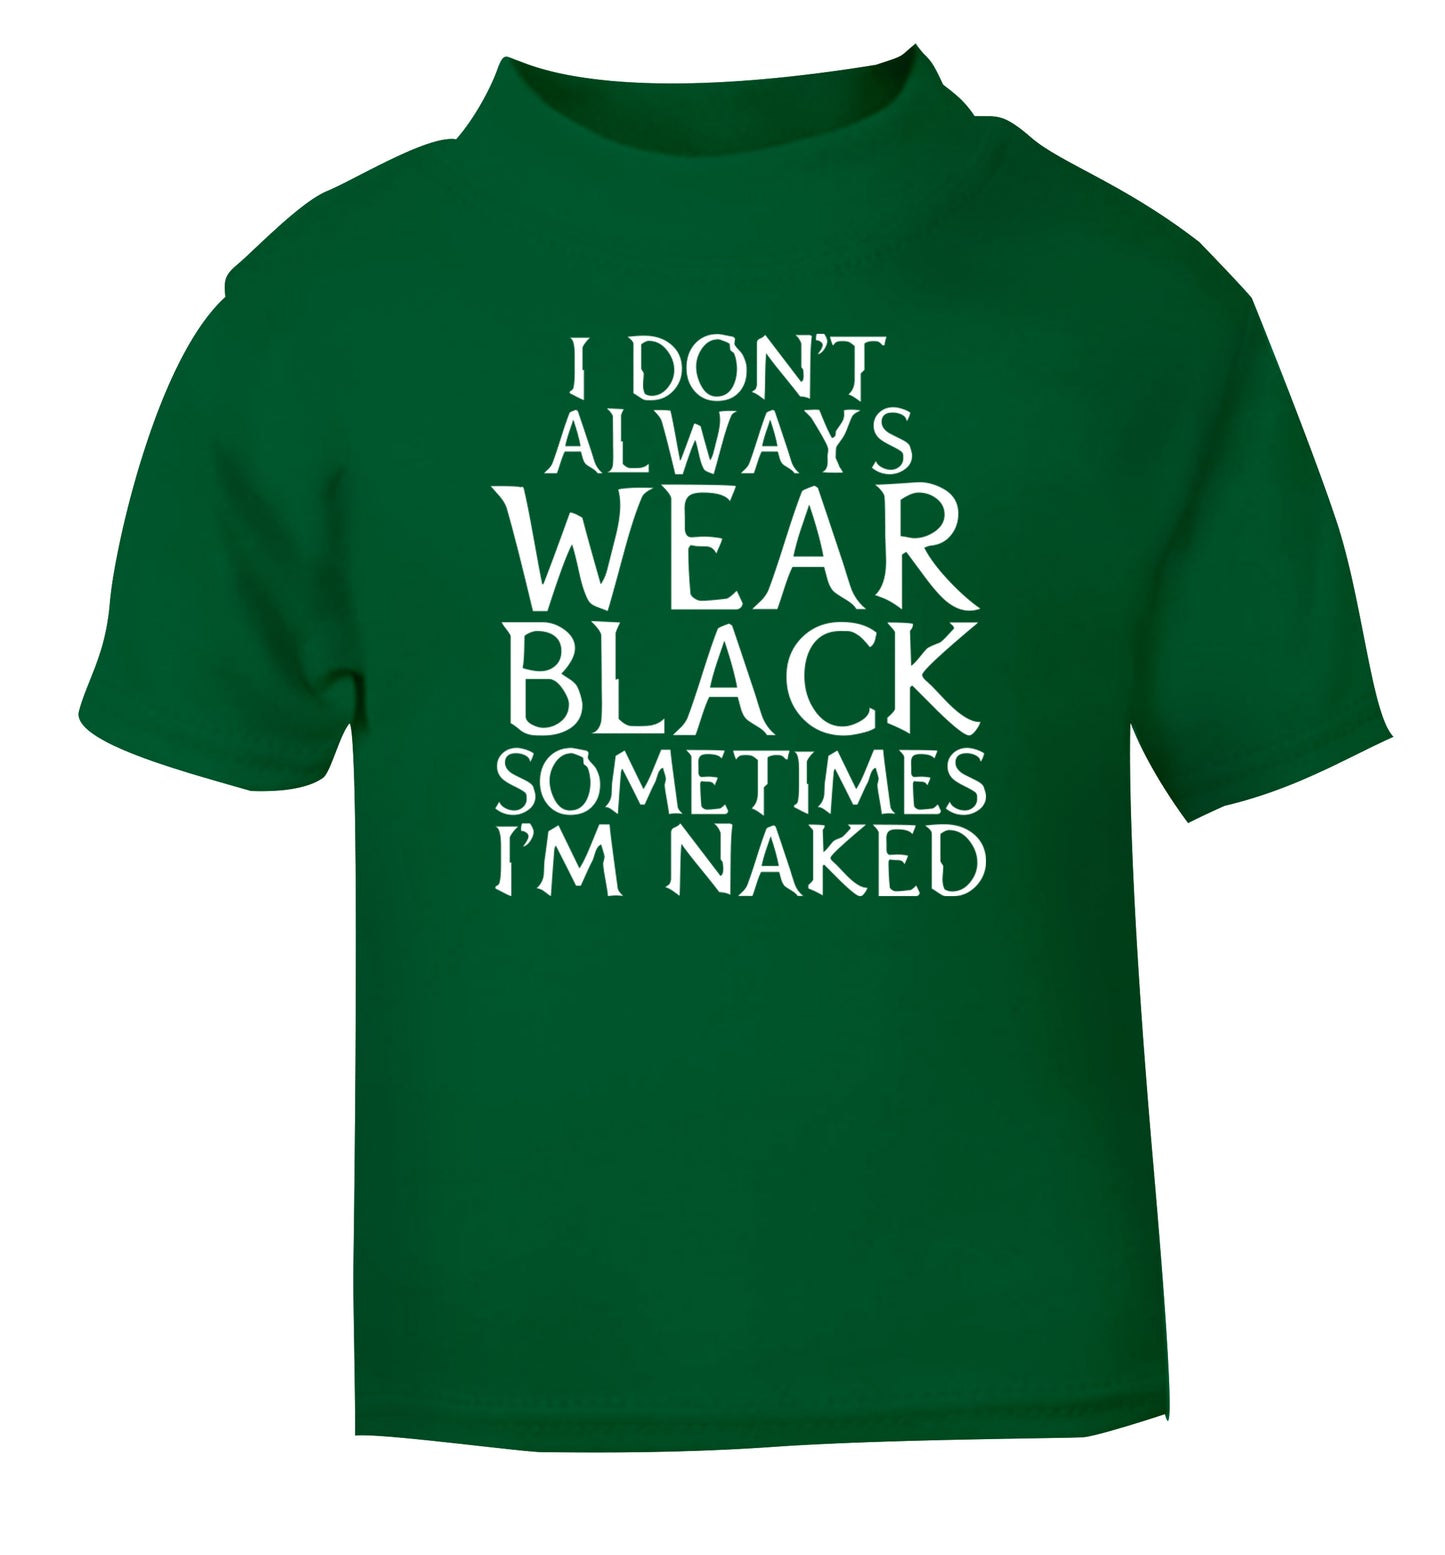 I don't always wear black sometimes I'm naked green Baby Toddler Tshirt 2 Years